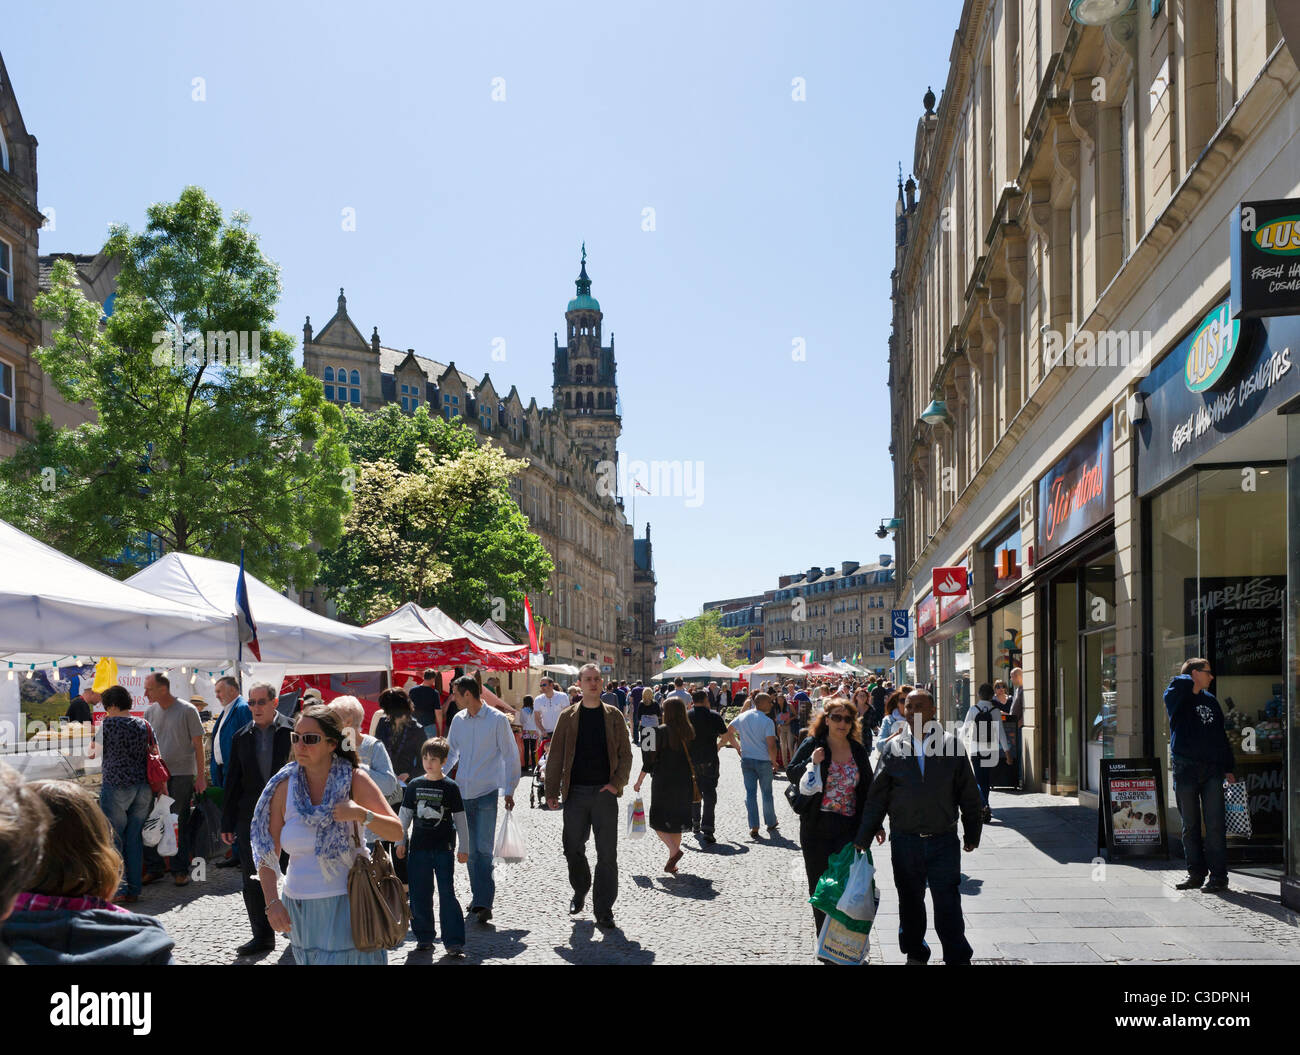 Continental Market on Fargate in city centre at beginning of May 2011, looking towards Town Hall, Sheffield, South Yorkshire, UK Stock Photo